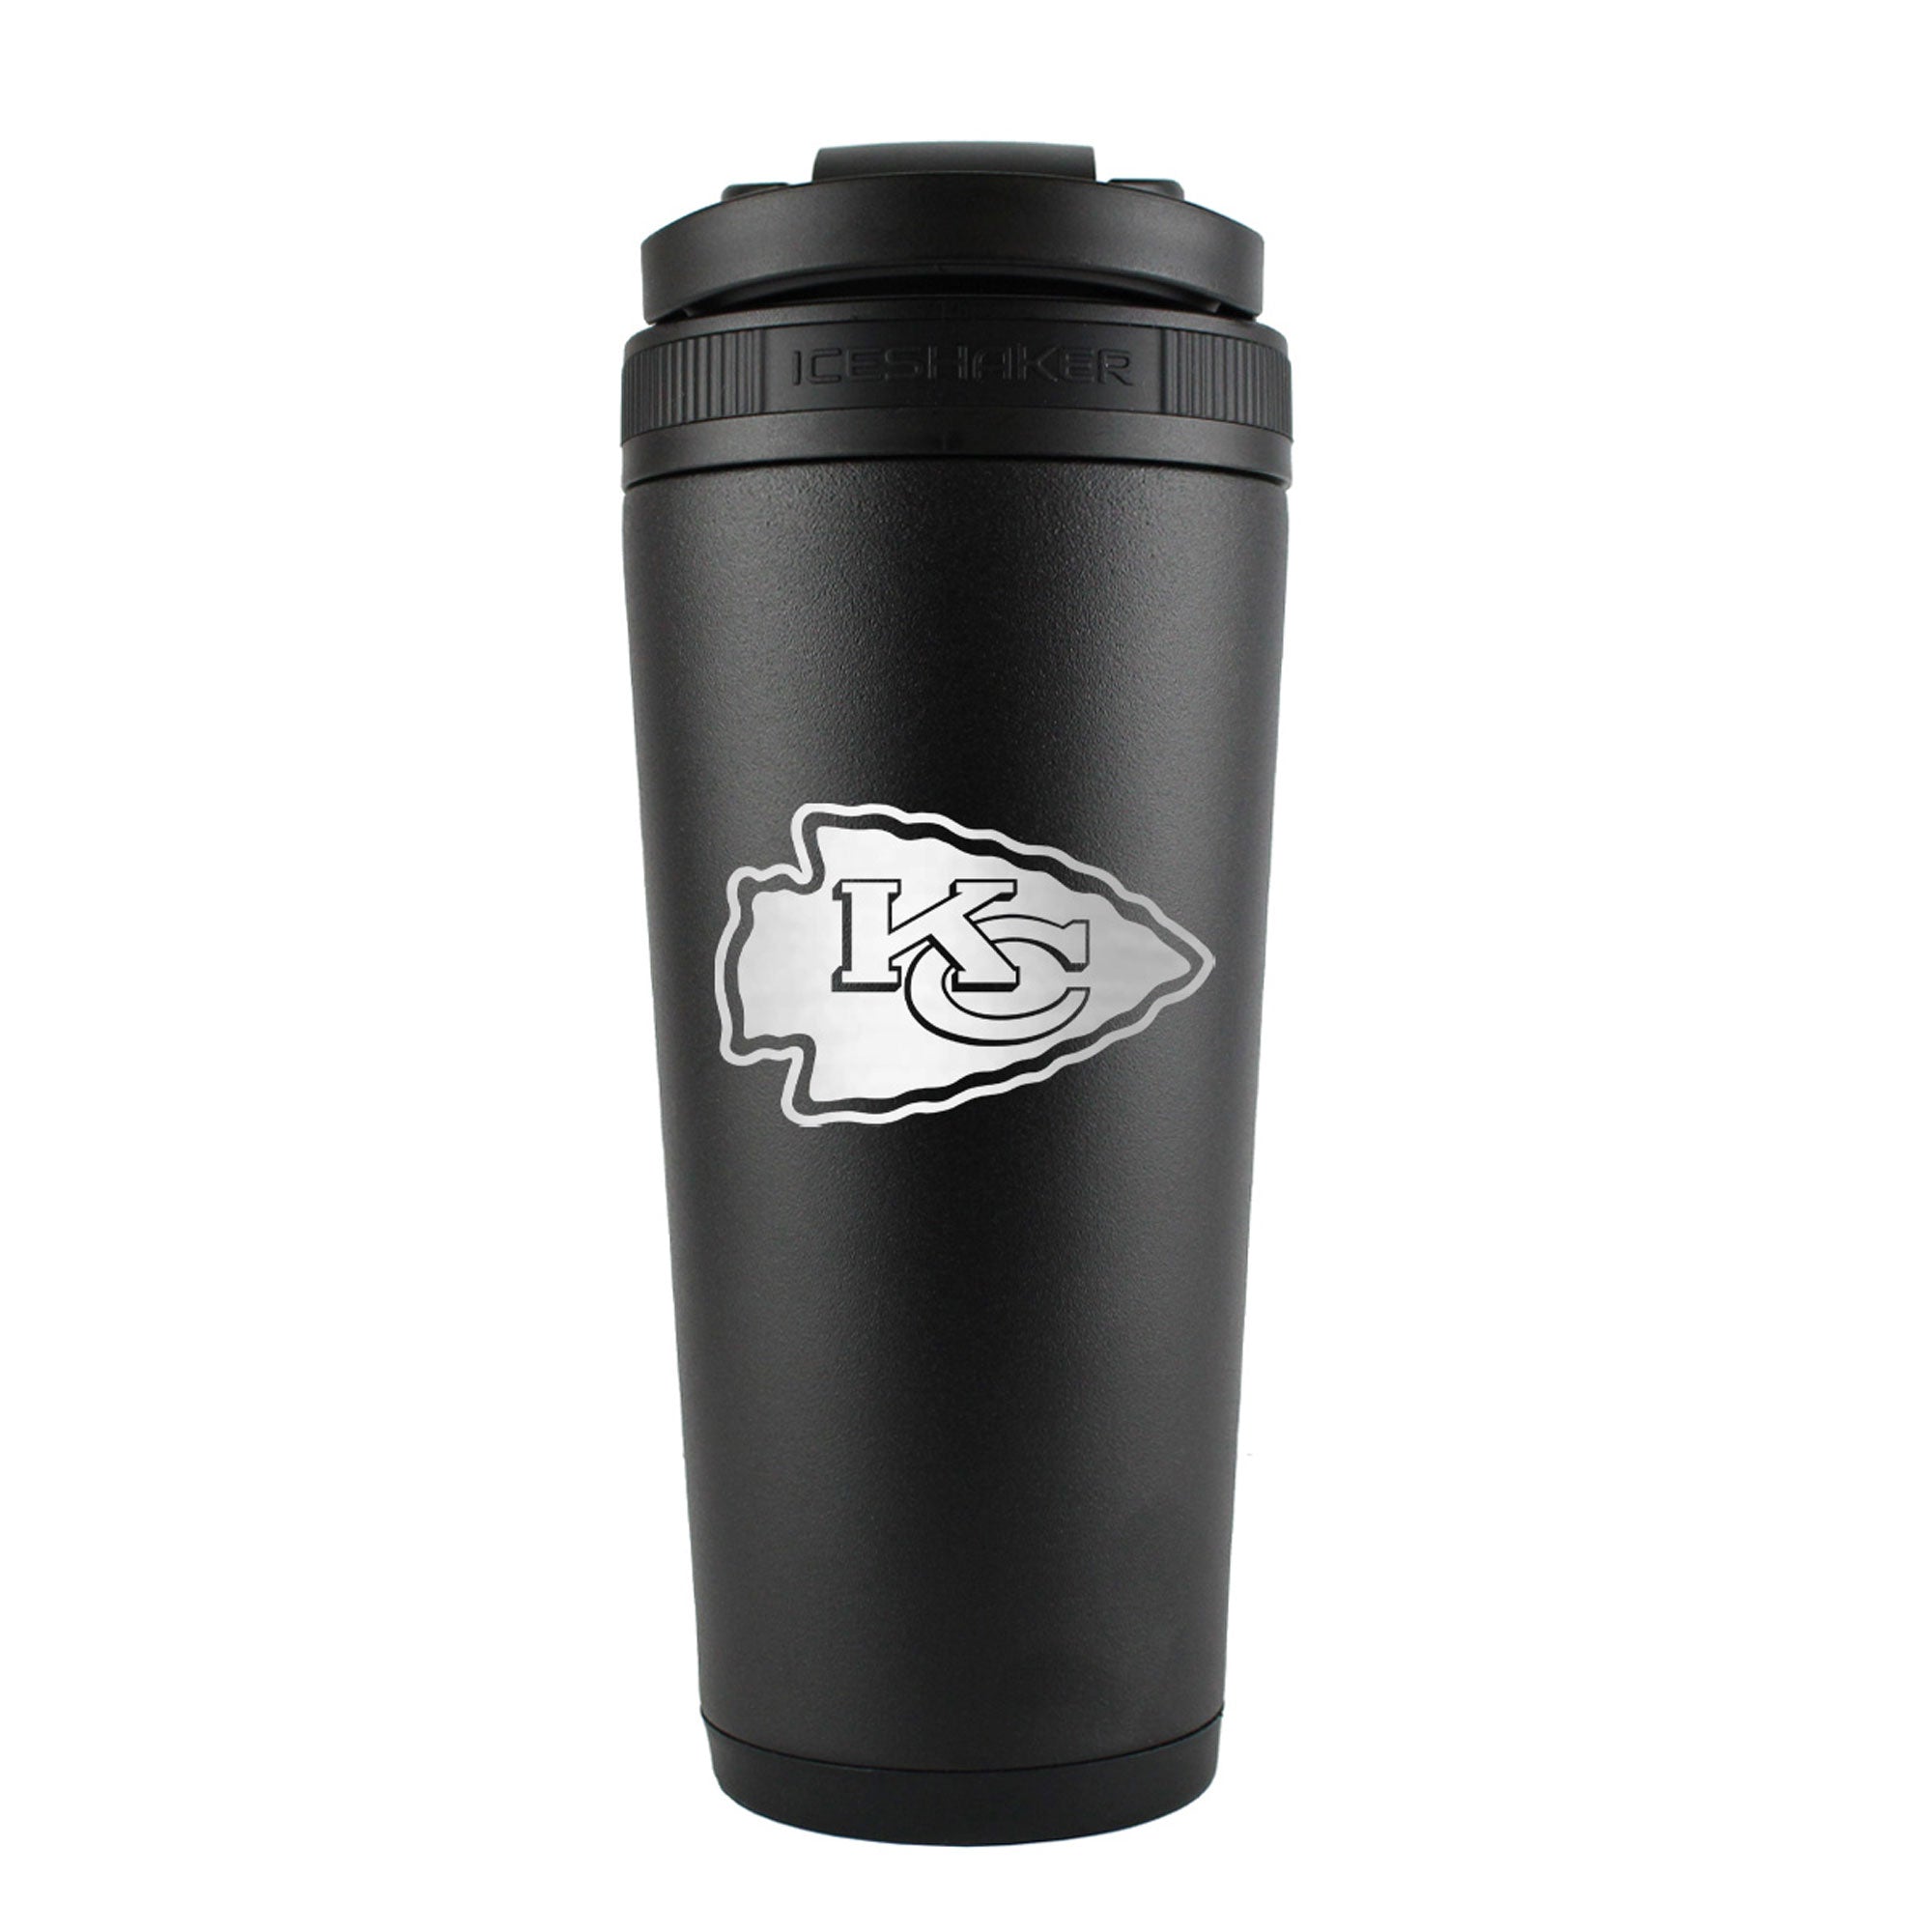 Officially Licensed Kansas City Chiefs 26oz Ice Shaker